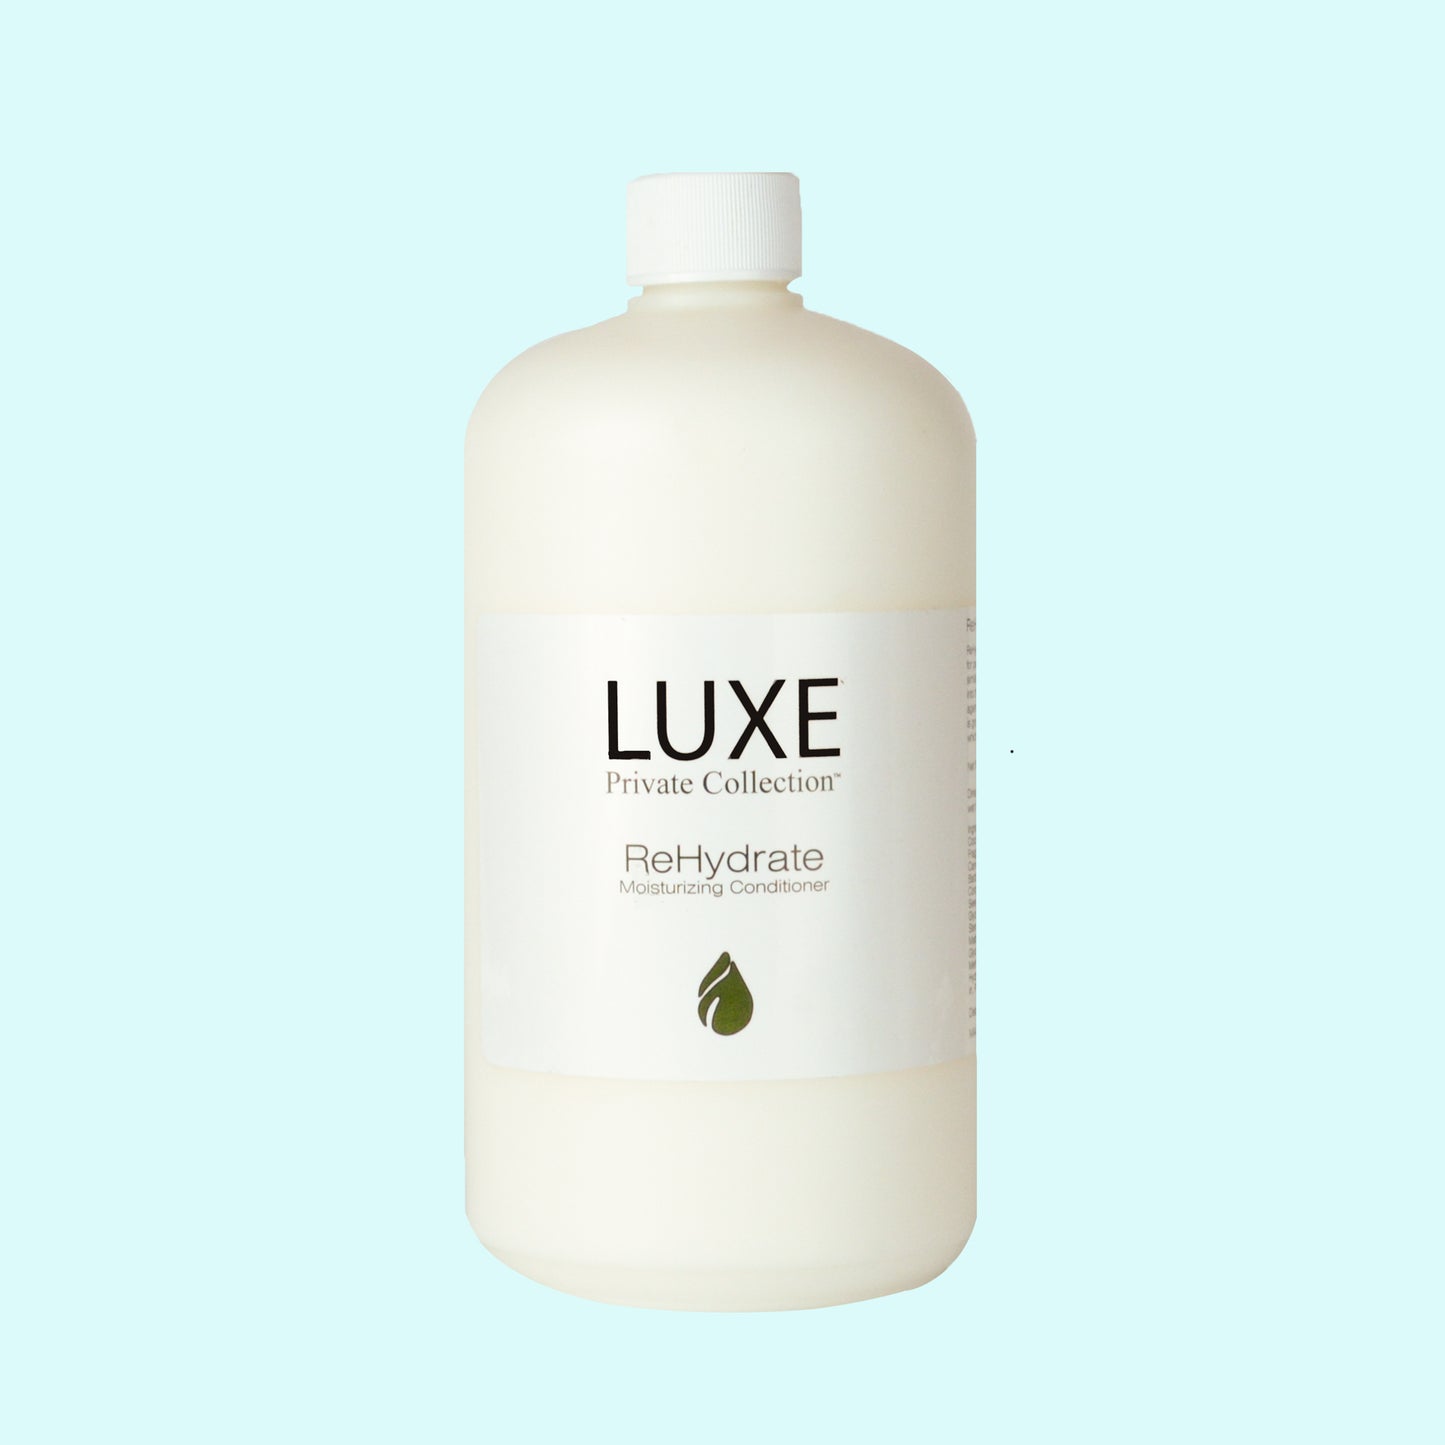 LUXE ReHydrate Moisturizing Conditioner